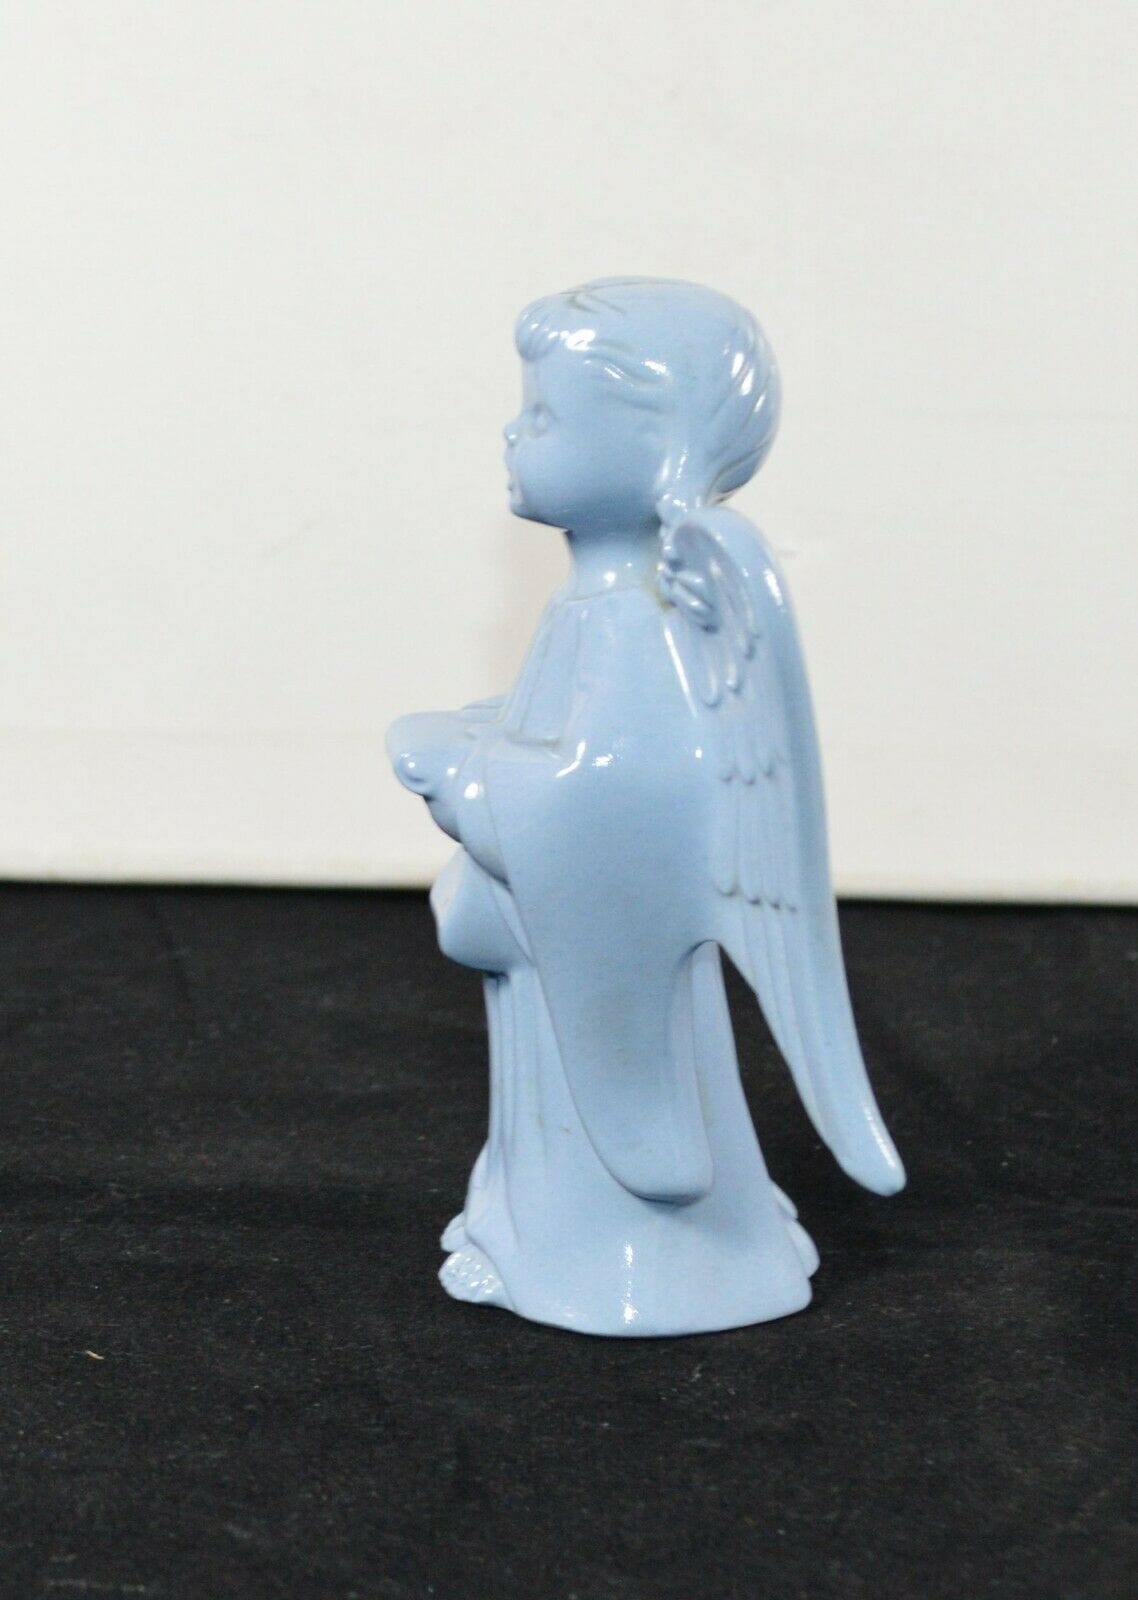 DECORATIVE FIGURINE BLUE ANGEL(PREVIOUSLY OWNED) GOOD CONDITION - TMD167207